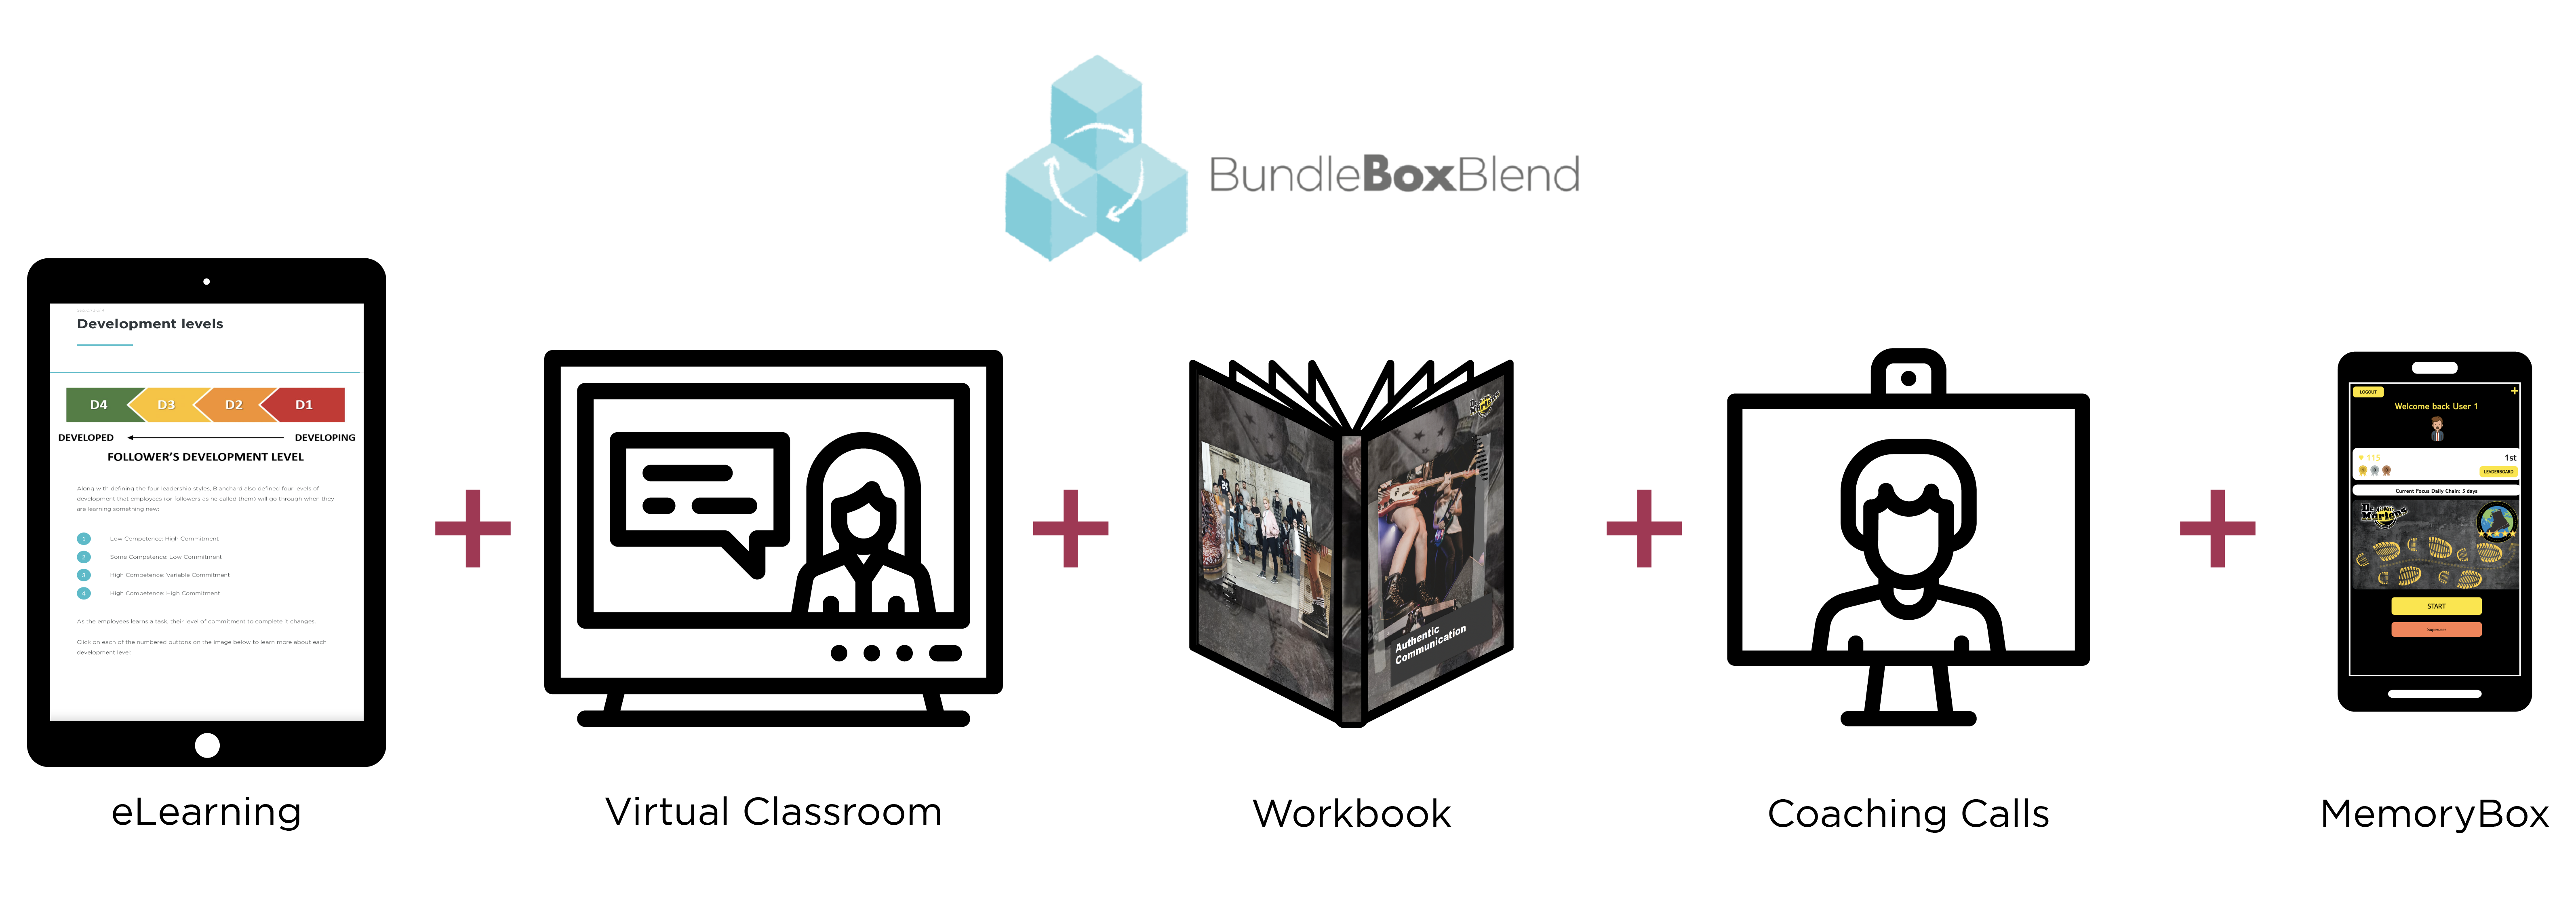 BundleBoxBlend includes: eLearning, virtual classrooms, workbook, coaching calls and MemoryBox (learning app).